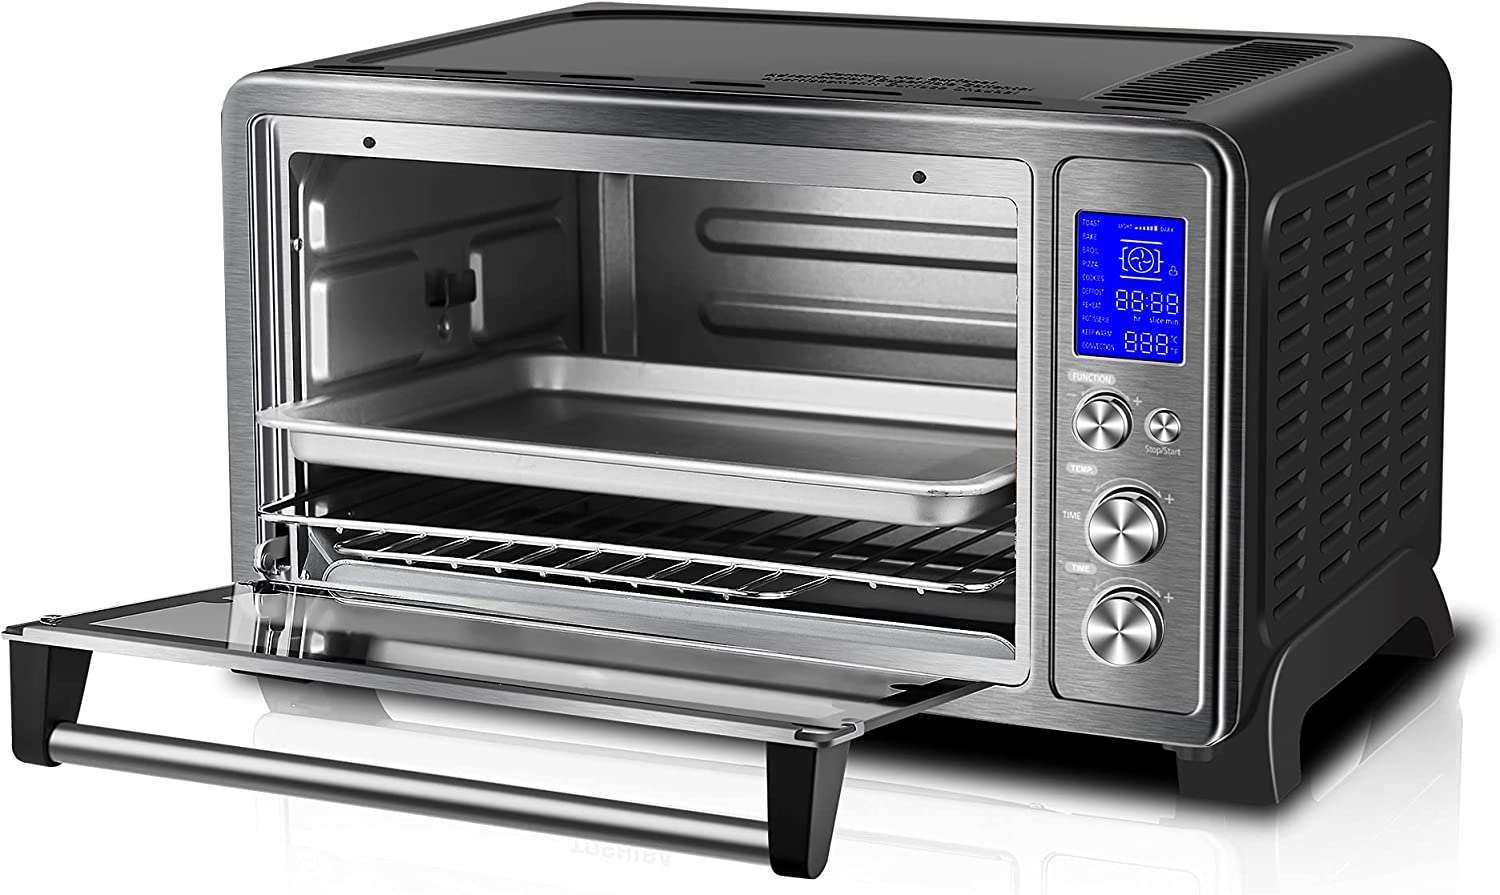 https://discounttoday.net/wp-content/uploads/2022/10/TOSHIBA-AC25CEW-BS-Large-6-Slice-Convection-Toaster-Oven-Countertop-10-In-One-with-Toast-Pizza-and-Rotisserie-1500W-Black-Stainless-Steel-Includes-6-Accessories8.jpg